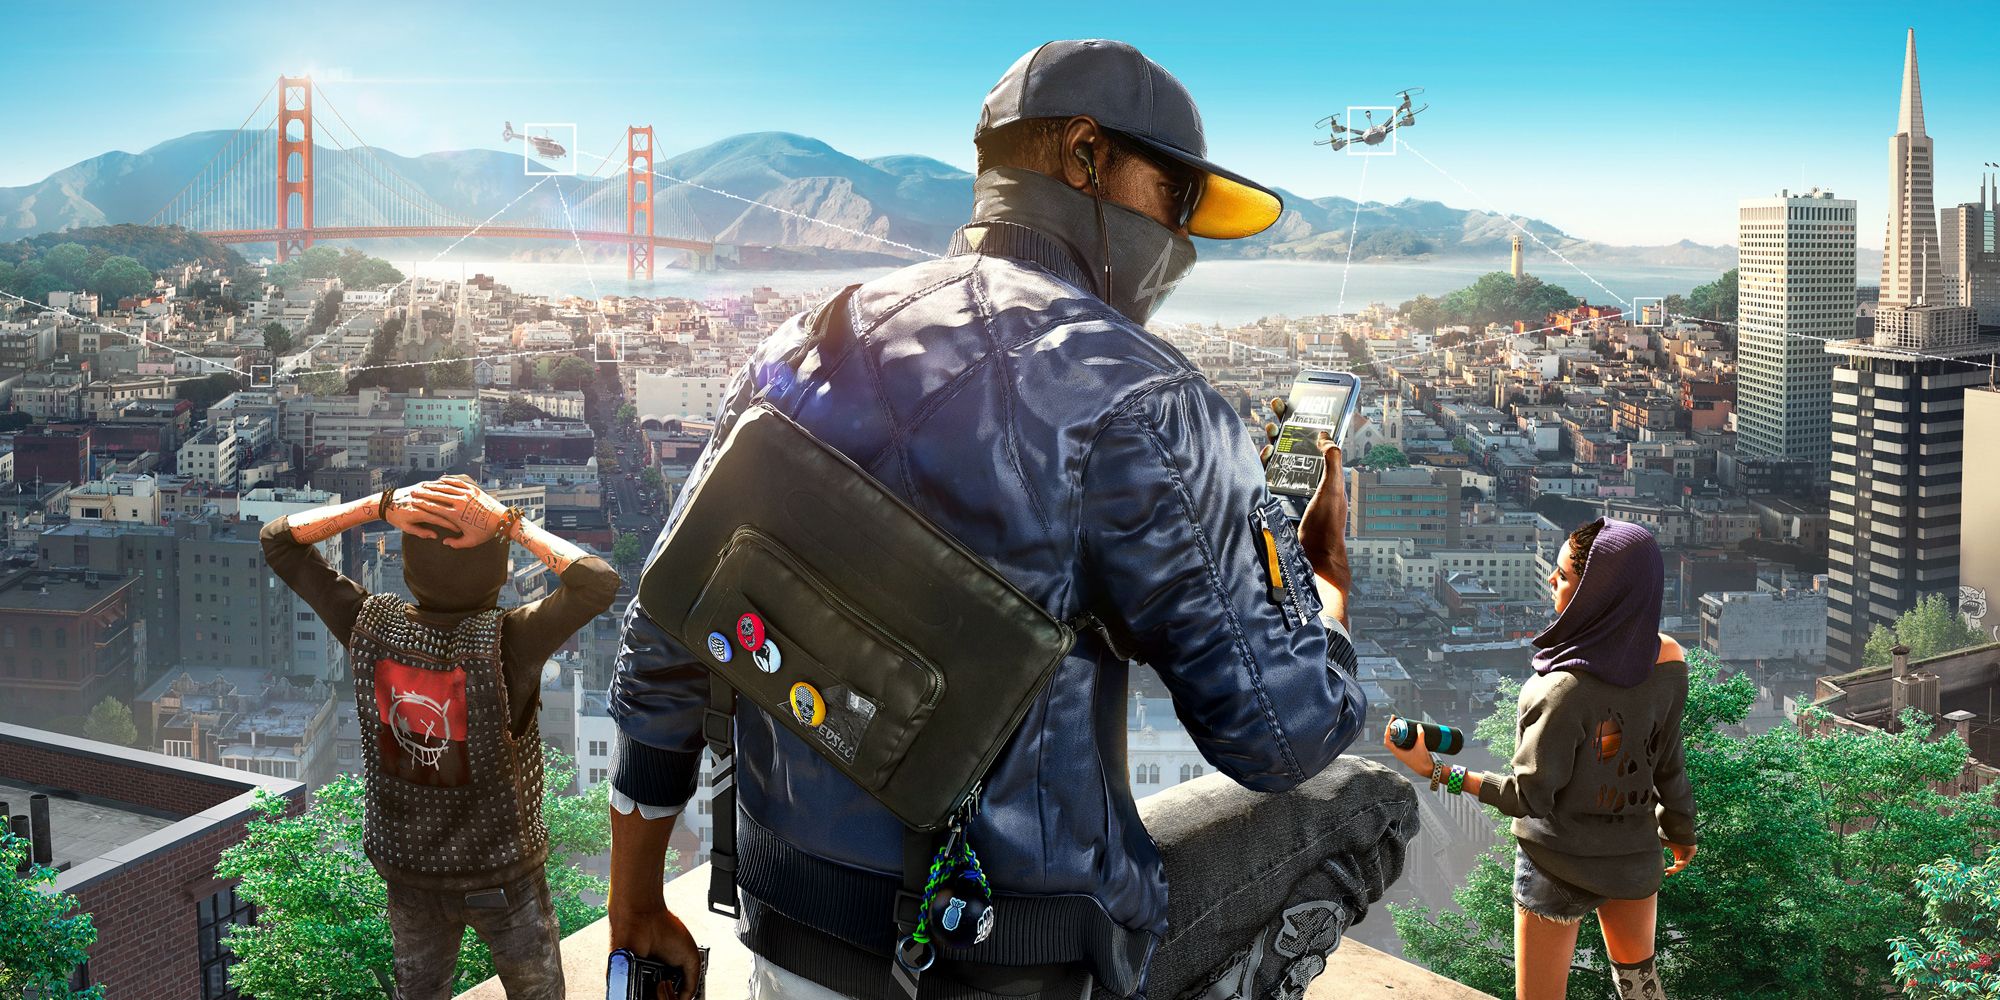 Watch Dogs 2. Poster of the game. Three characters looking off into the city ahead.